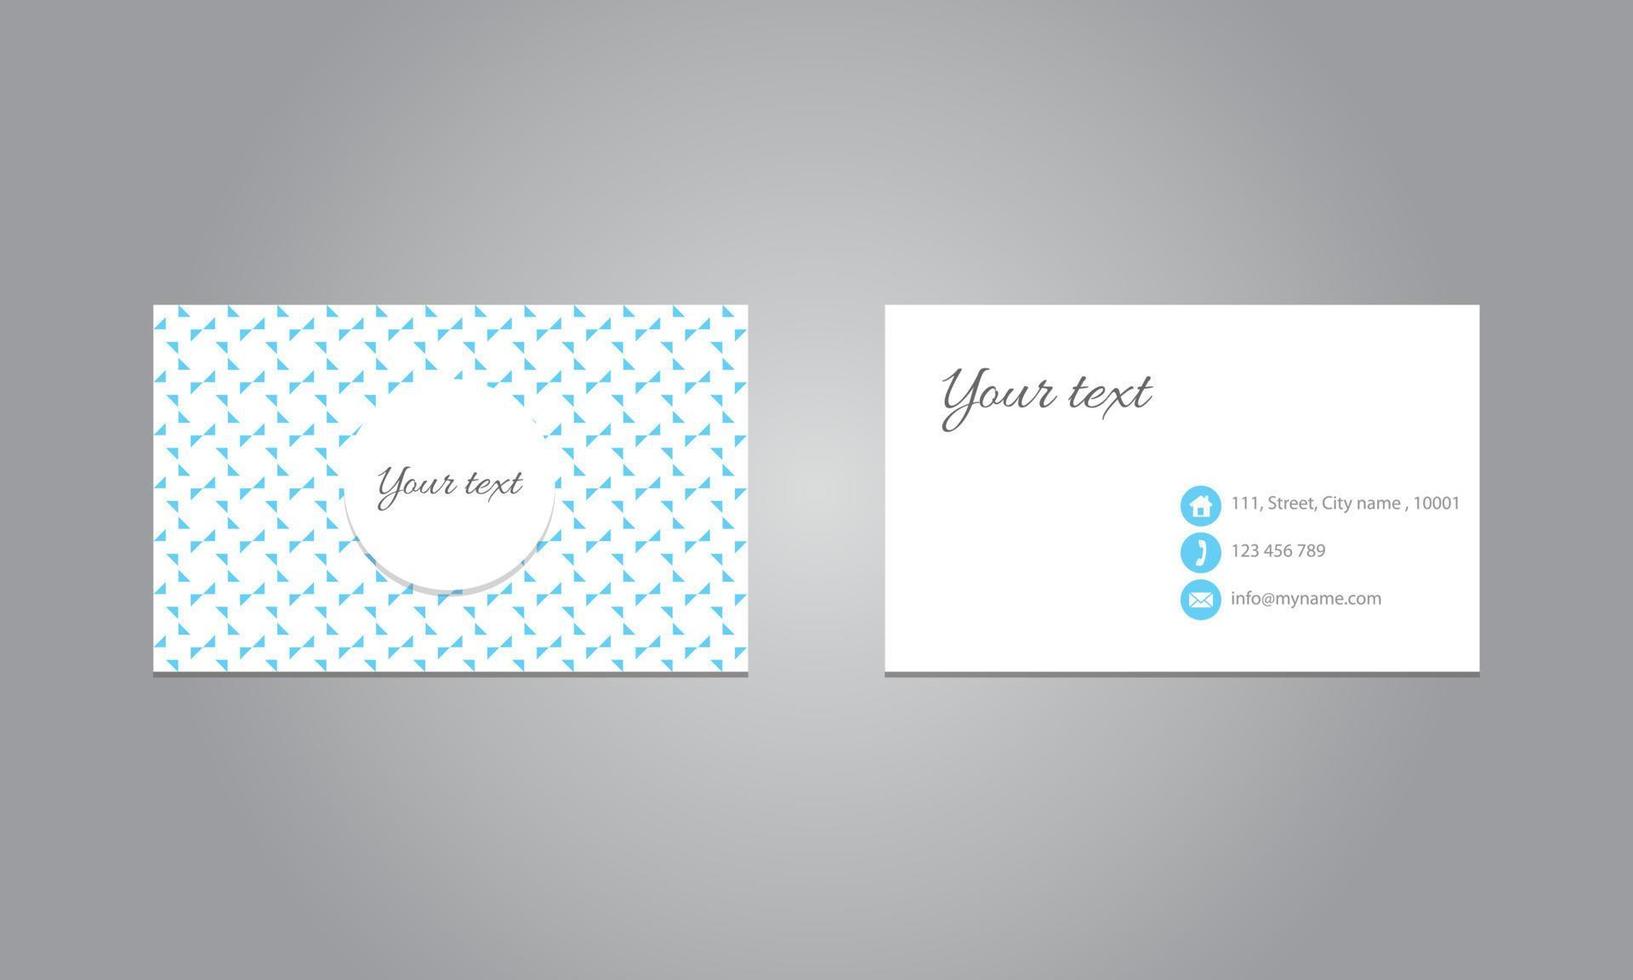 Abstract business cards Design background Template vector